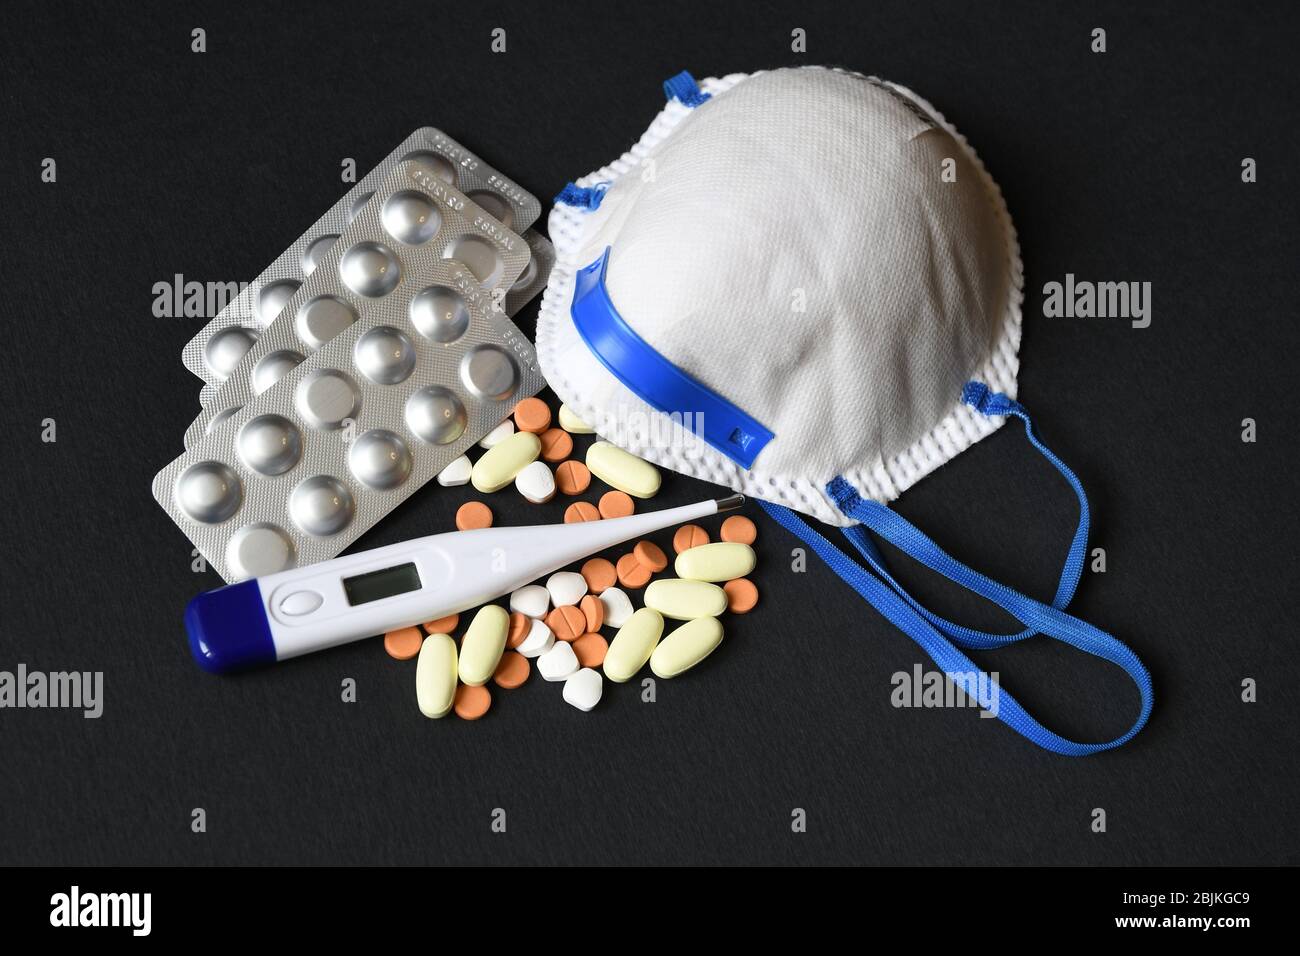 COVID-19 - Coronavirus disease - 2019-nCoV, concept of WUHAN corona virus. Protective mask together with medicine tablets and thermometer. Chinese Stock Photo